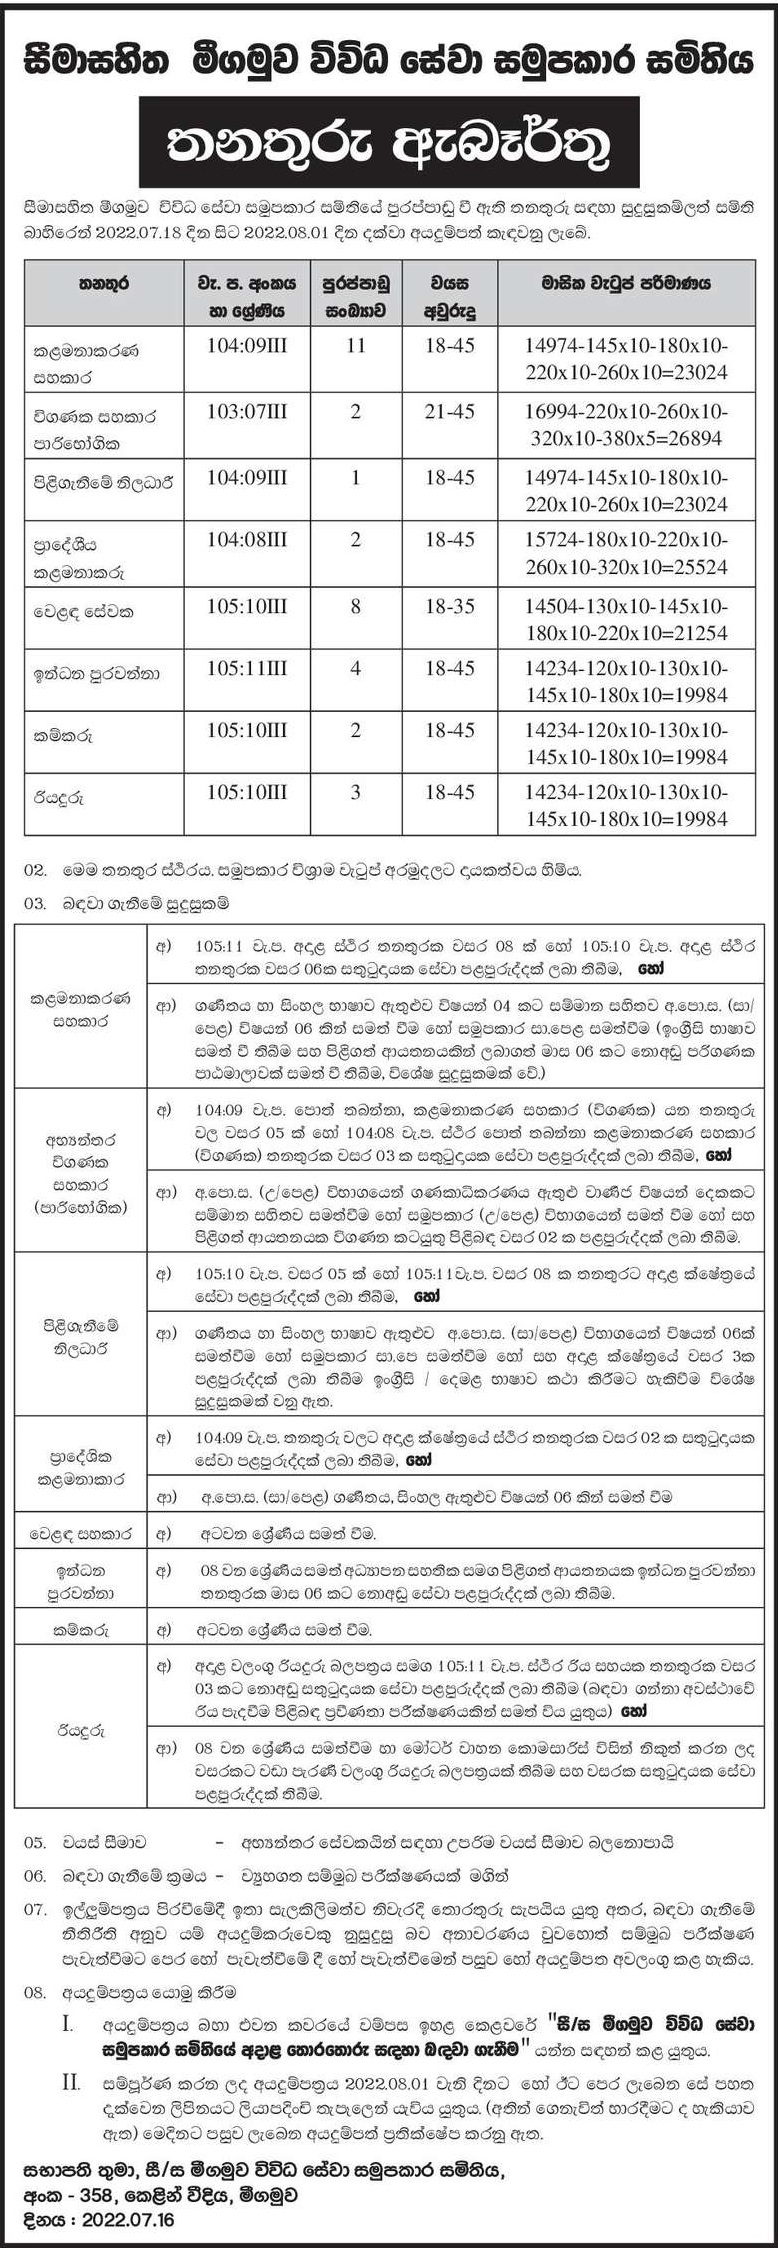 Management Assistant, Audit Assistant Customer, Receptionist, Area Manager, Sales Clerk, Fuel Filler, Laborer, Driver - co-operative society in Negombo